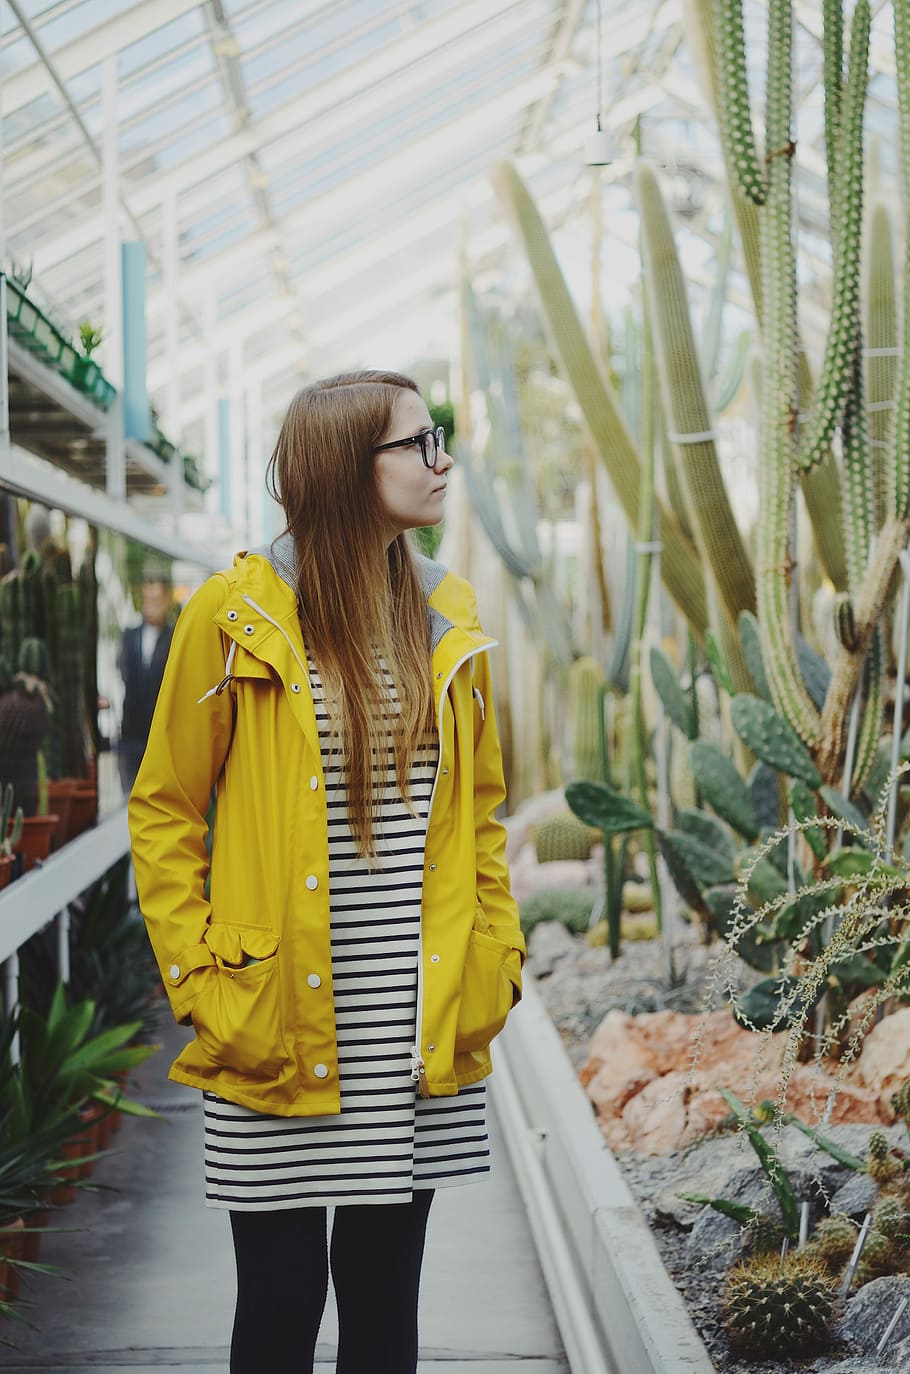 woman wearing black and white striped dress and yellow jacket staring at plant, HD wallpaper